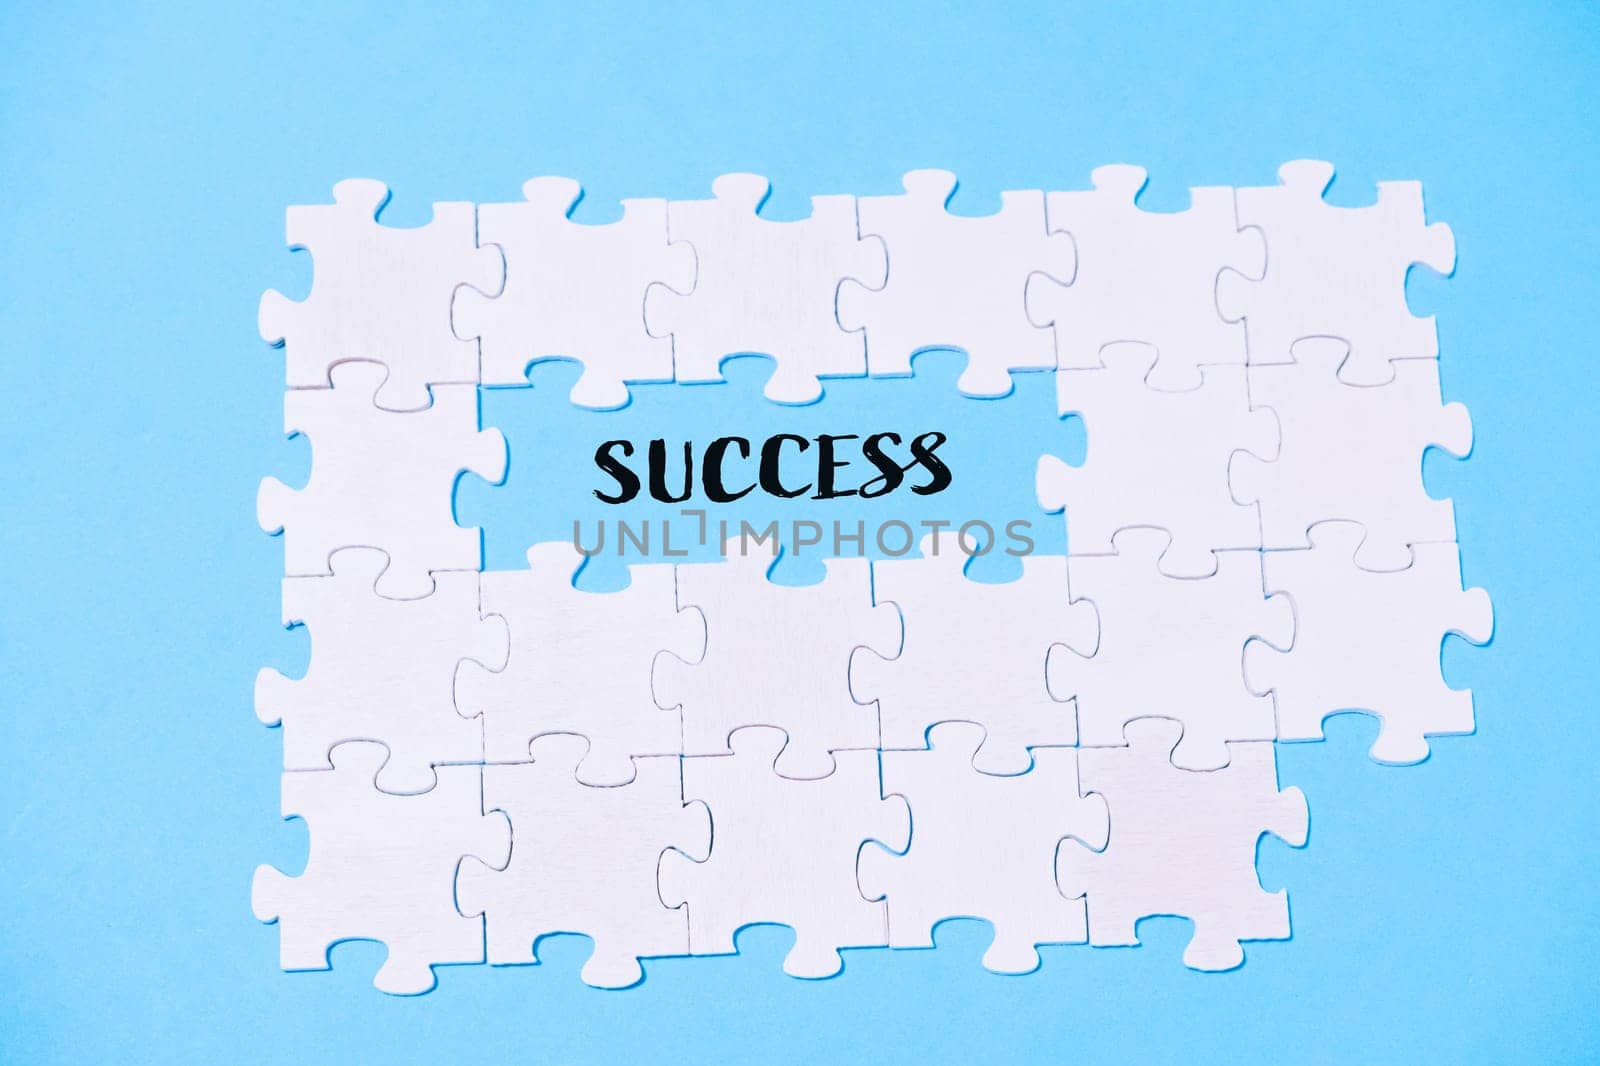 A puzzle with the word success written in the middle. The puzzle pieces are scattered around the word, creating a sense of accomplishment and achievement